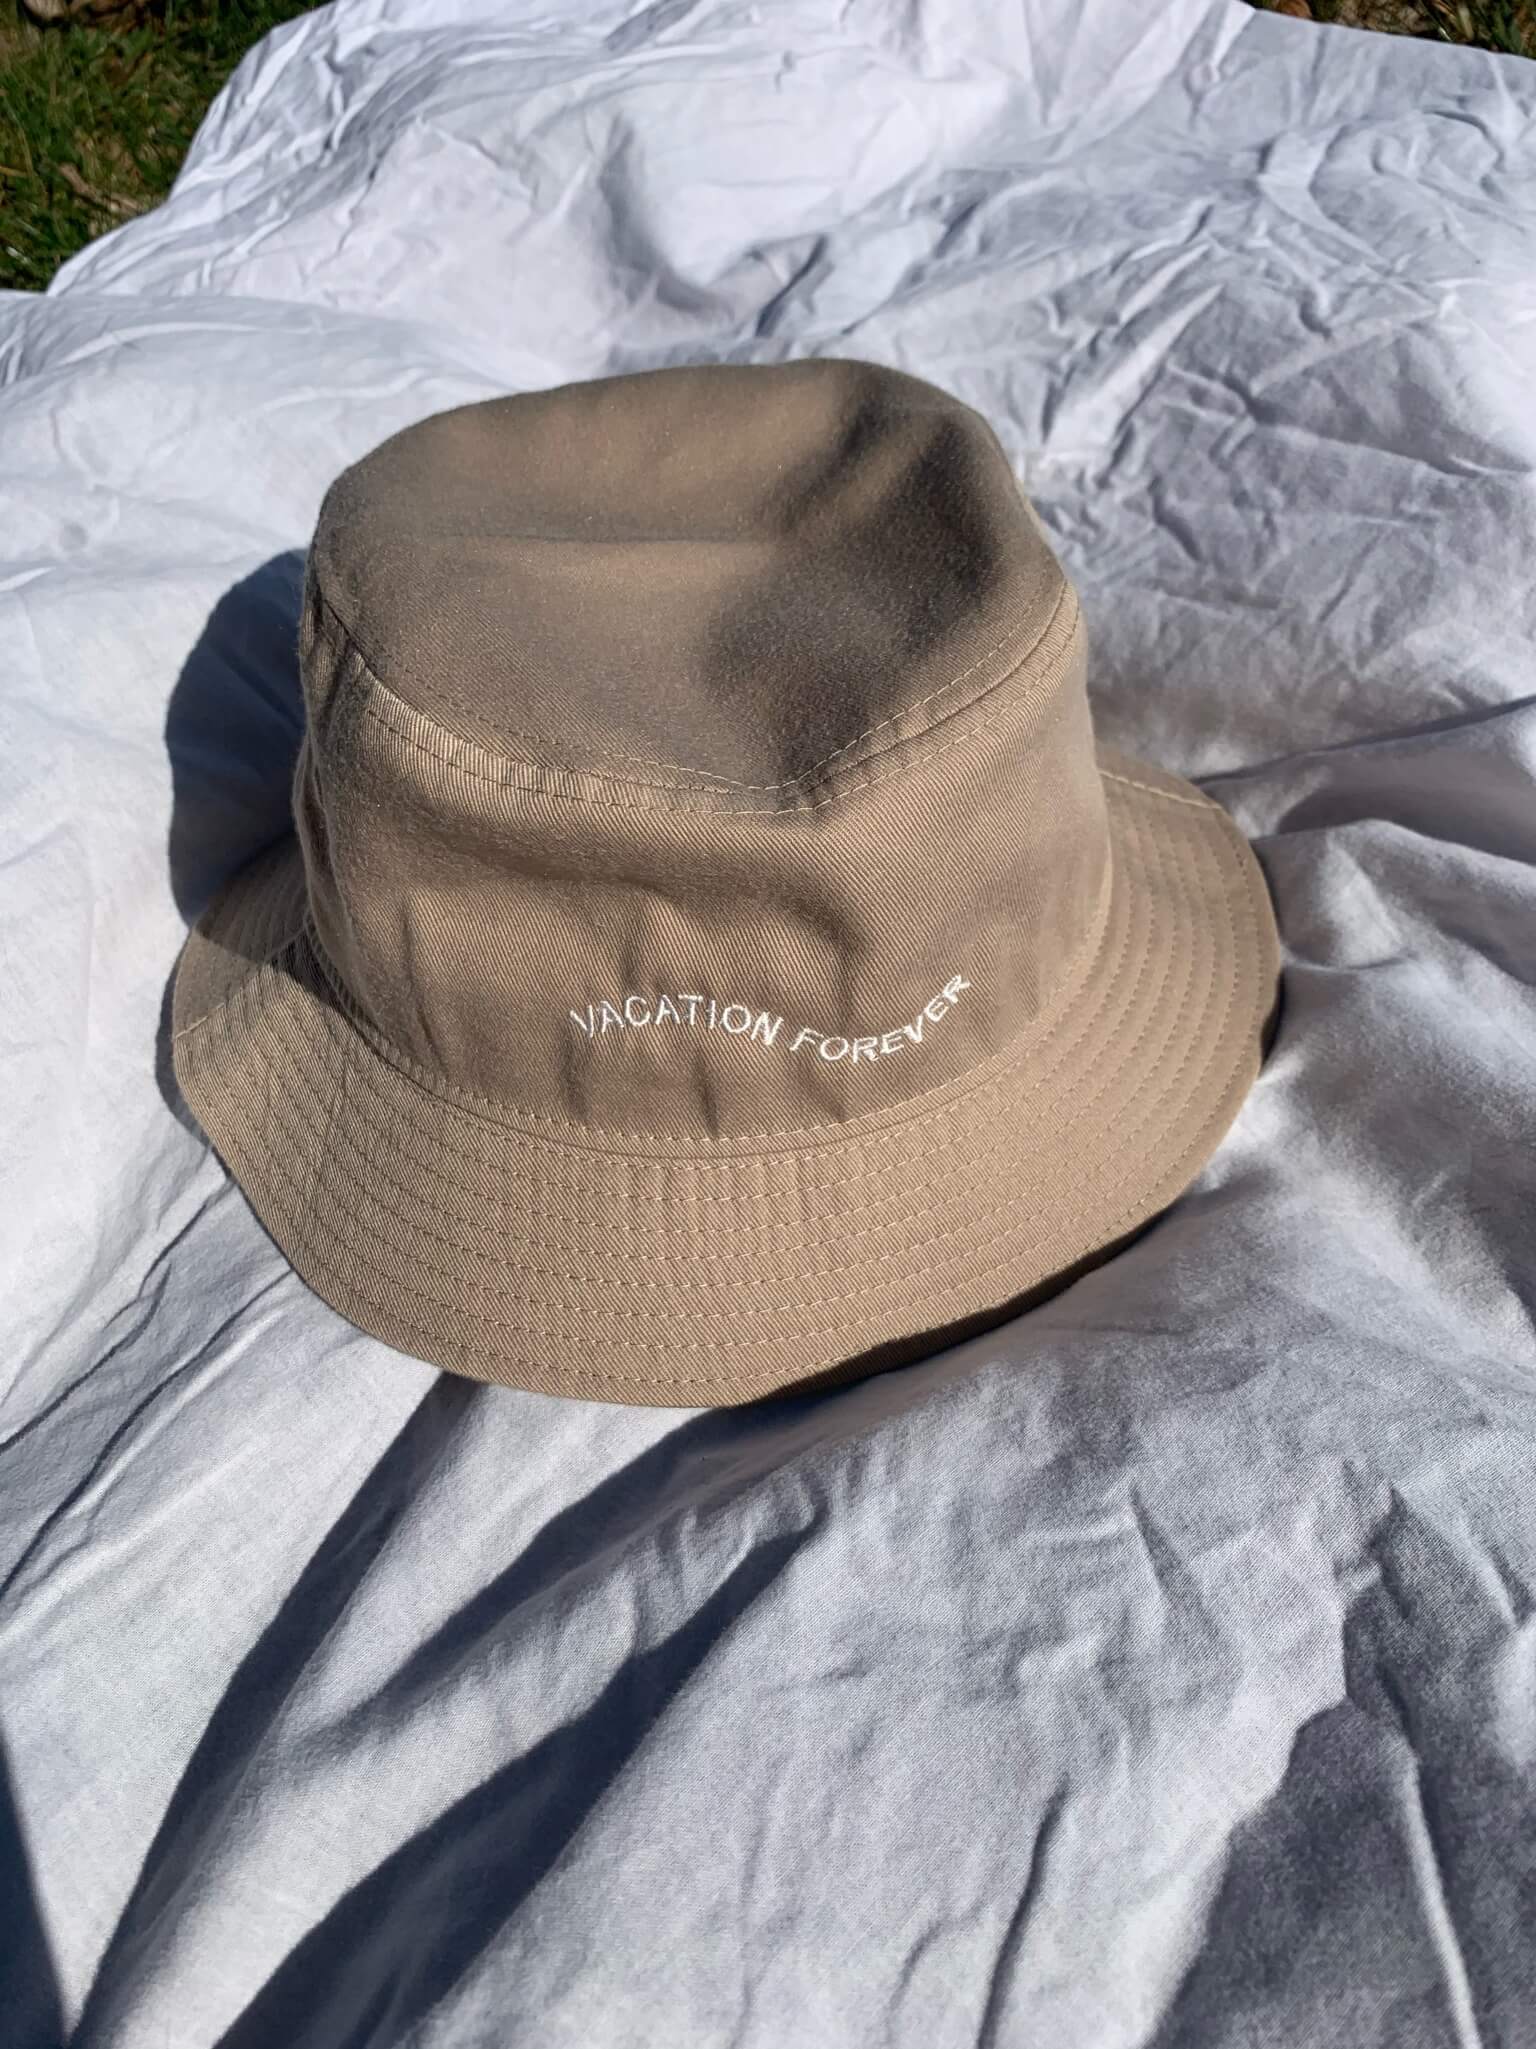 Vacation Forever Bucket hat